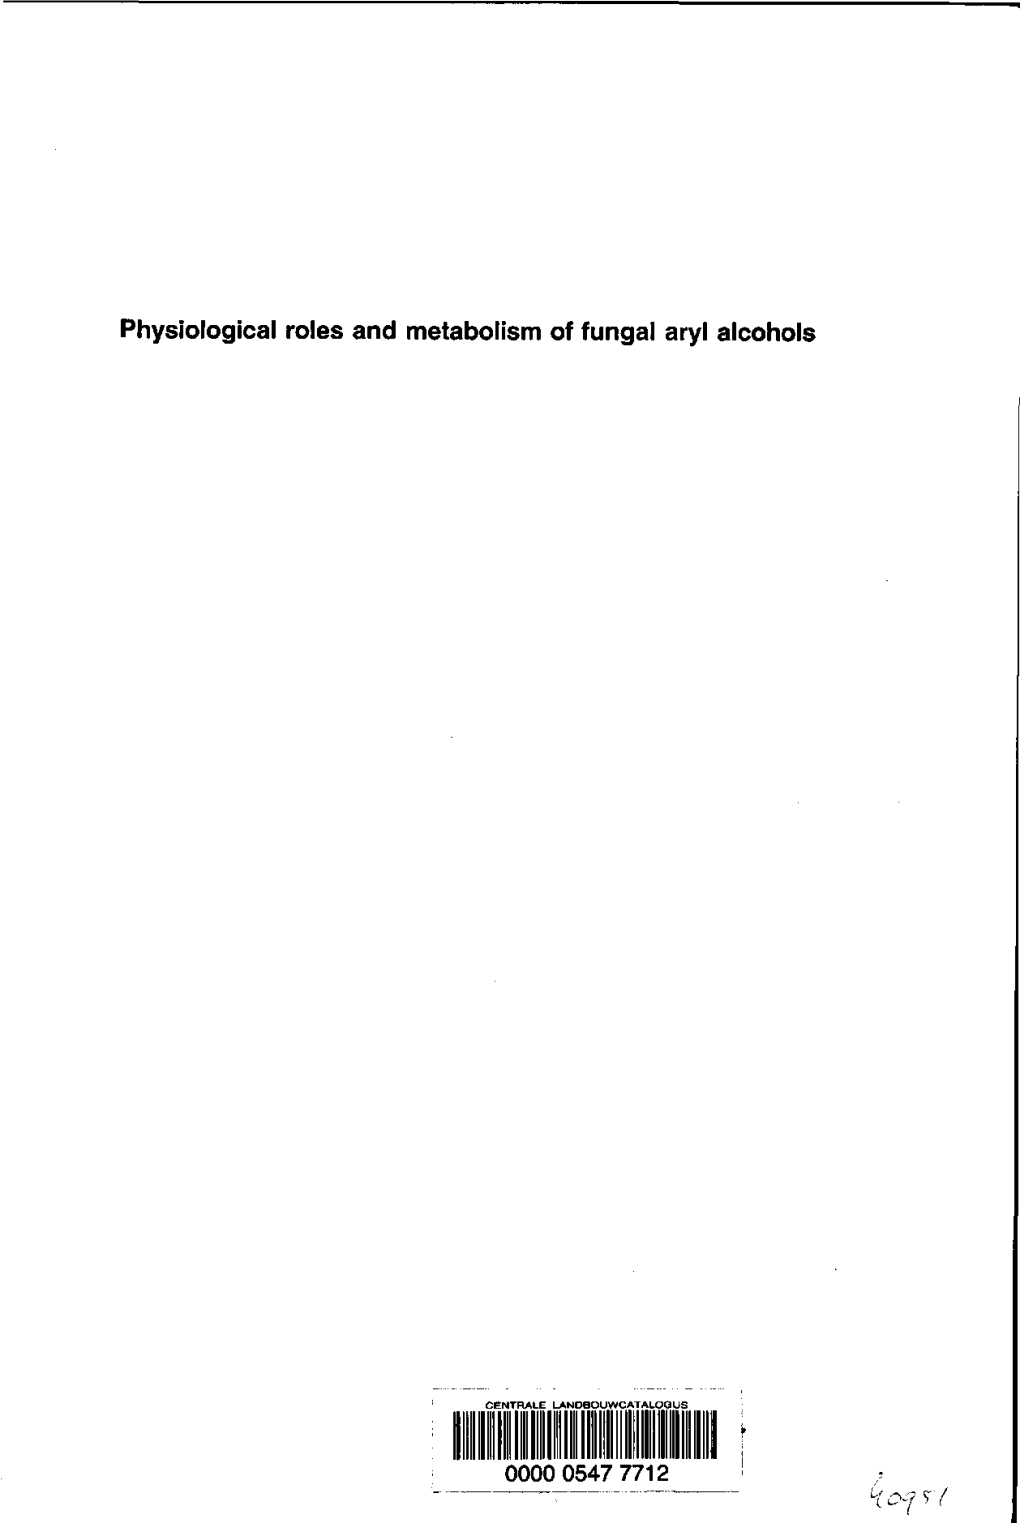 Physiological Roles and Metabolism of Fungal Aryl Alcohols